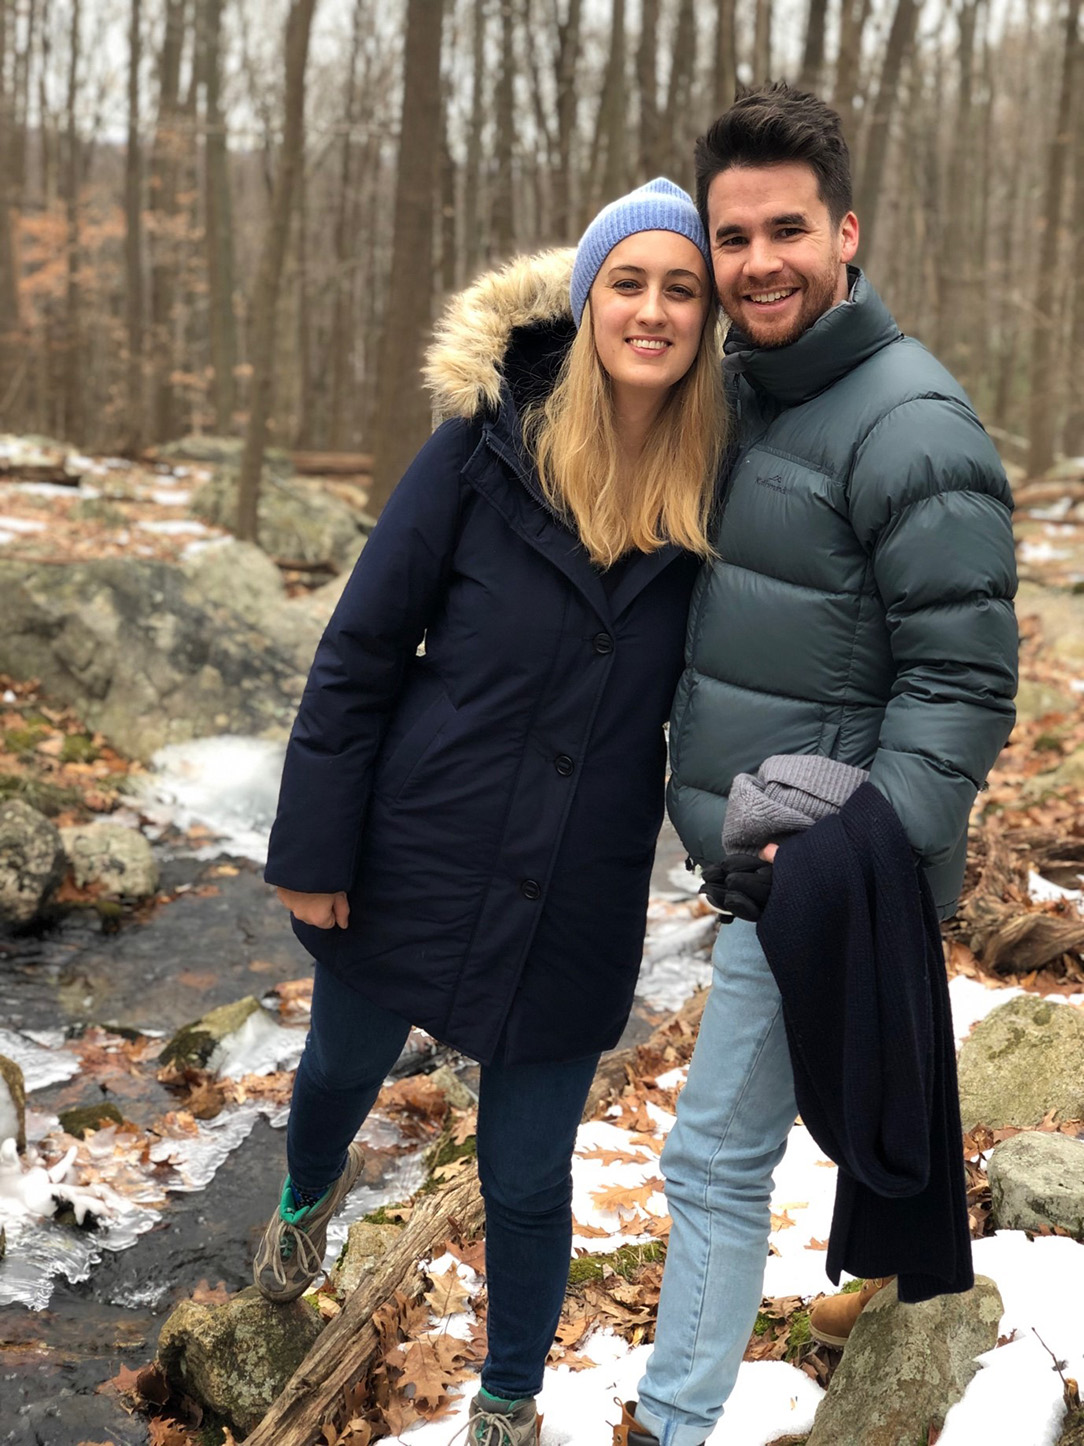 Clare and husband, Tom, in on a weekend trip in Upstate New York